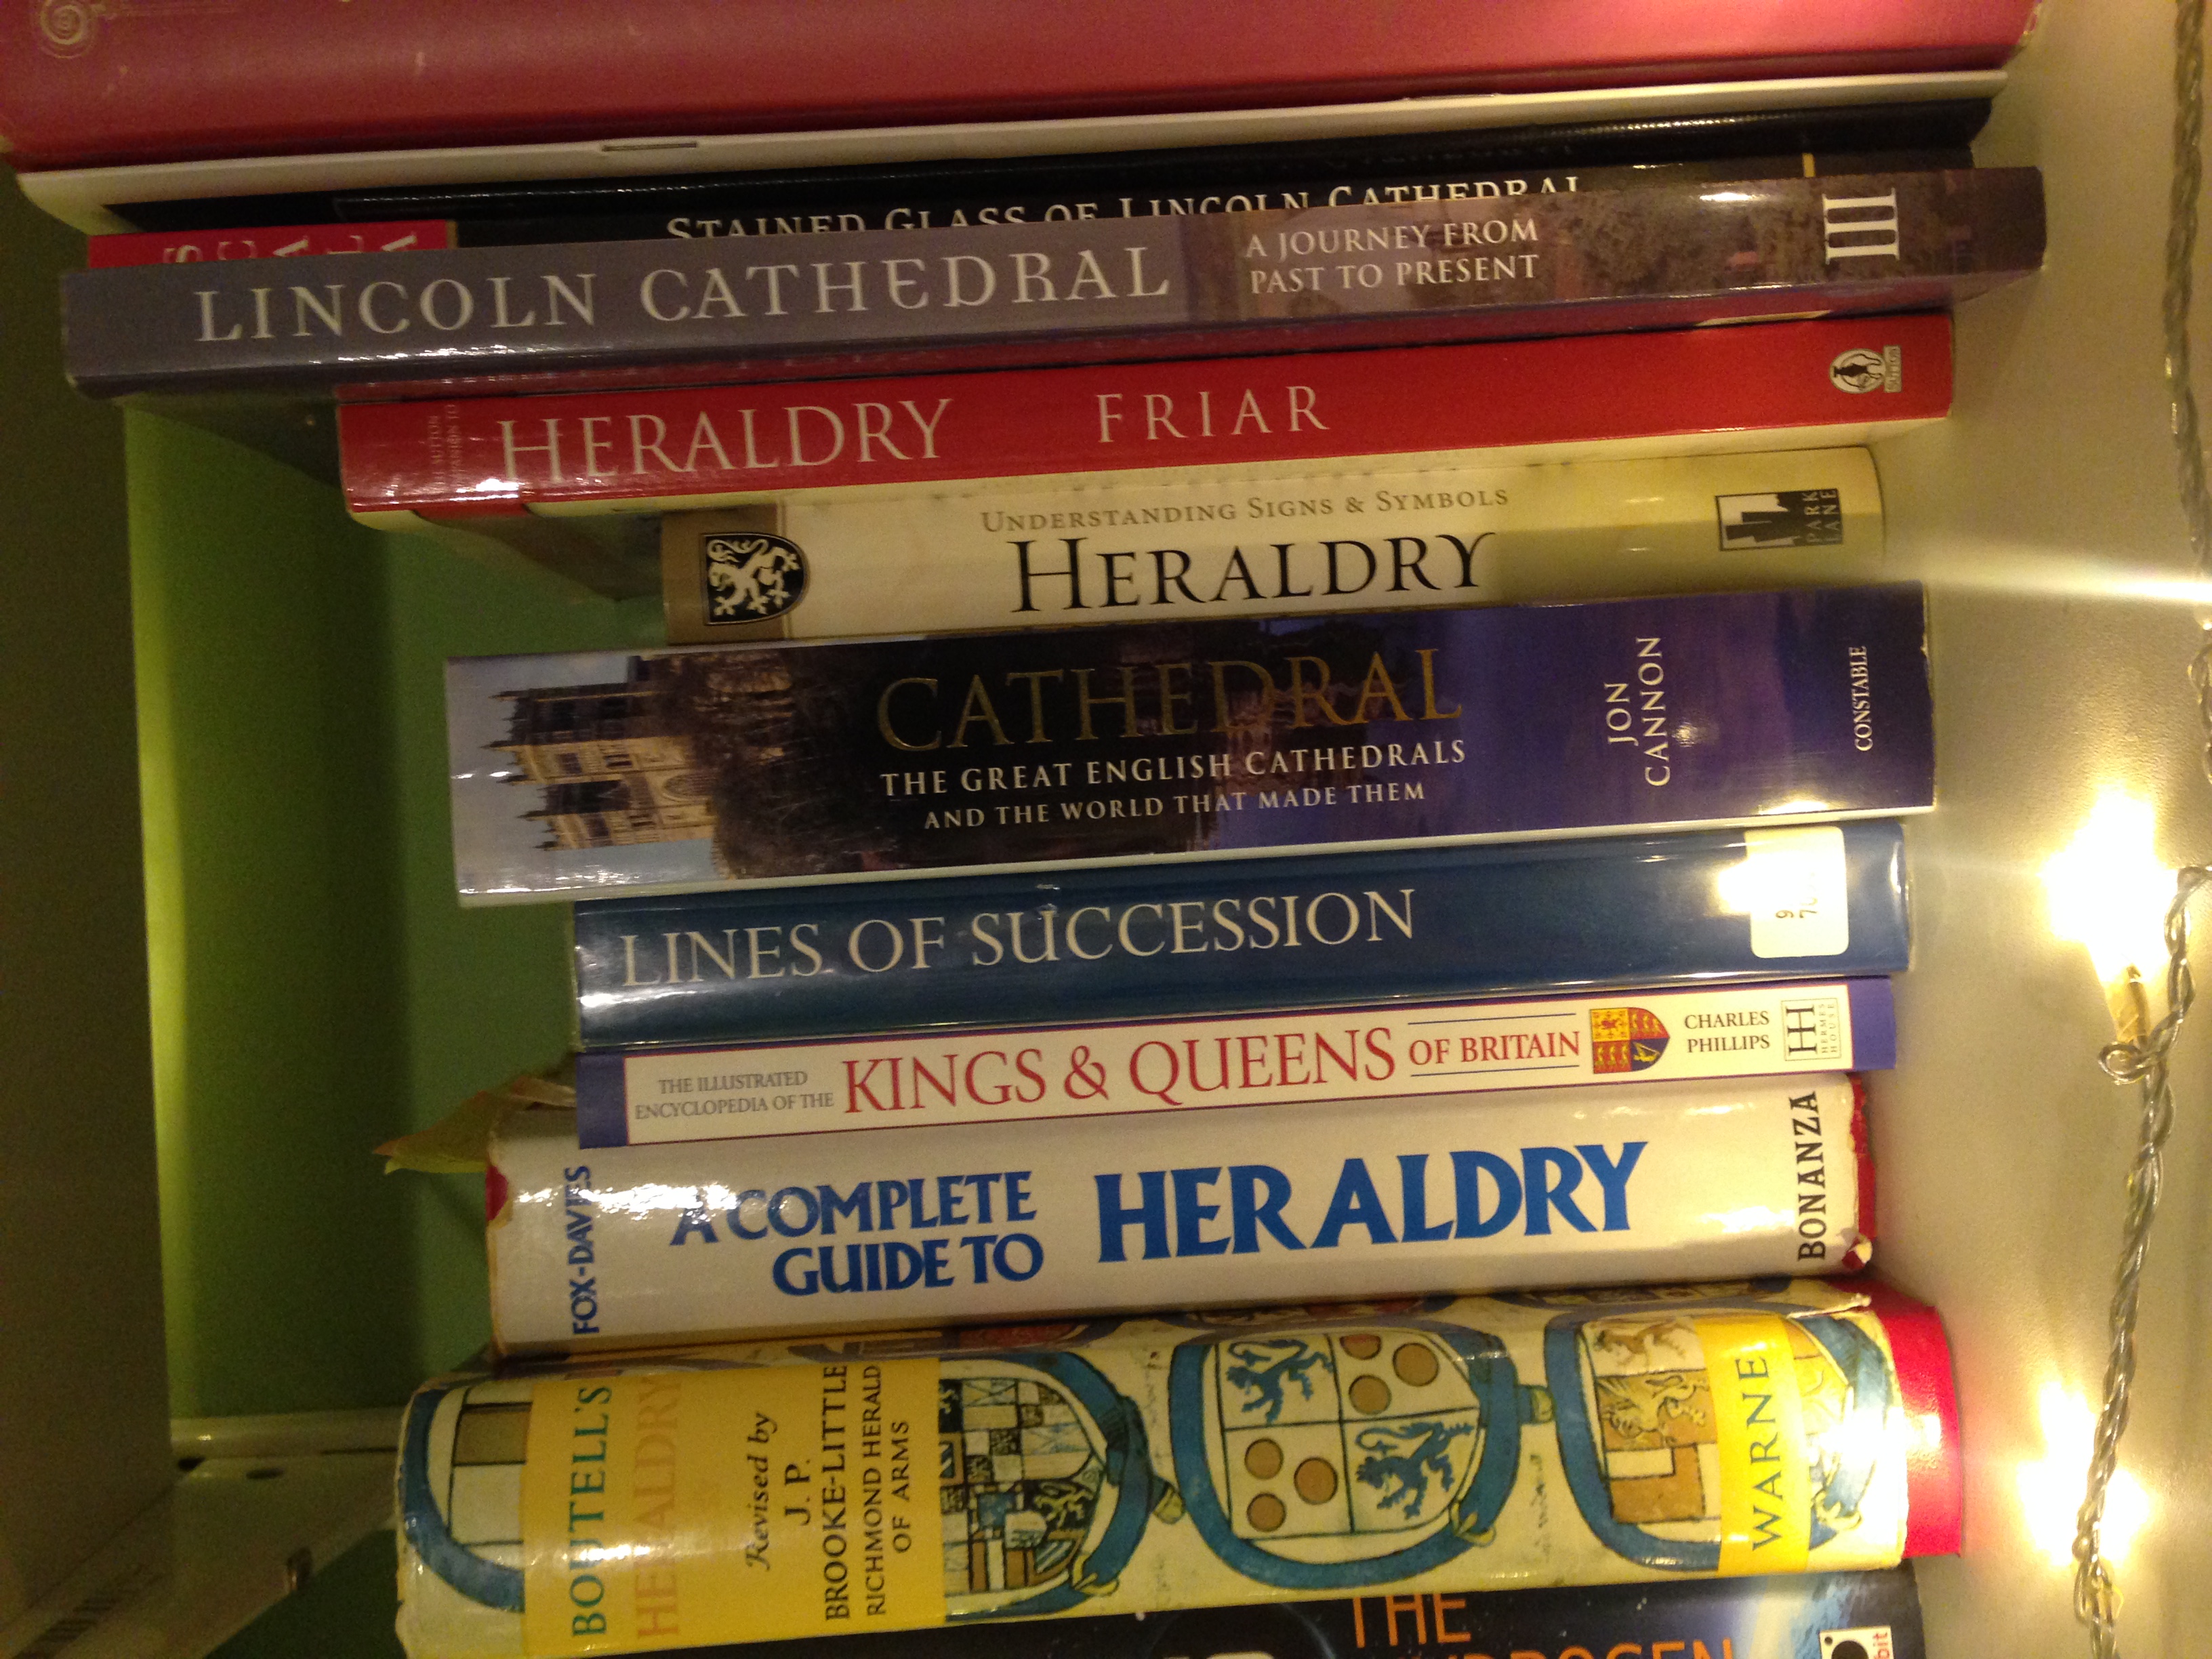 My heraldry collection, so far. (I have many more books as PDFs from archive.org but these don't make for a good picture...)